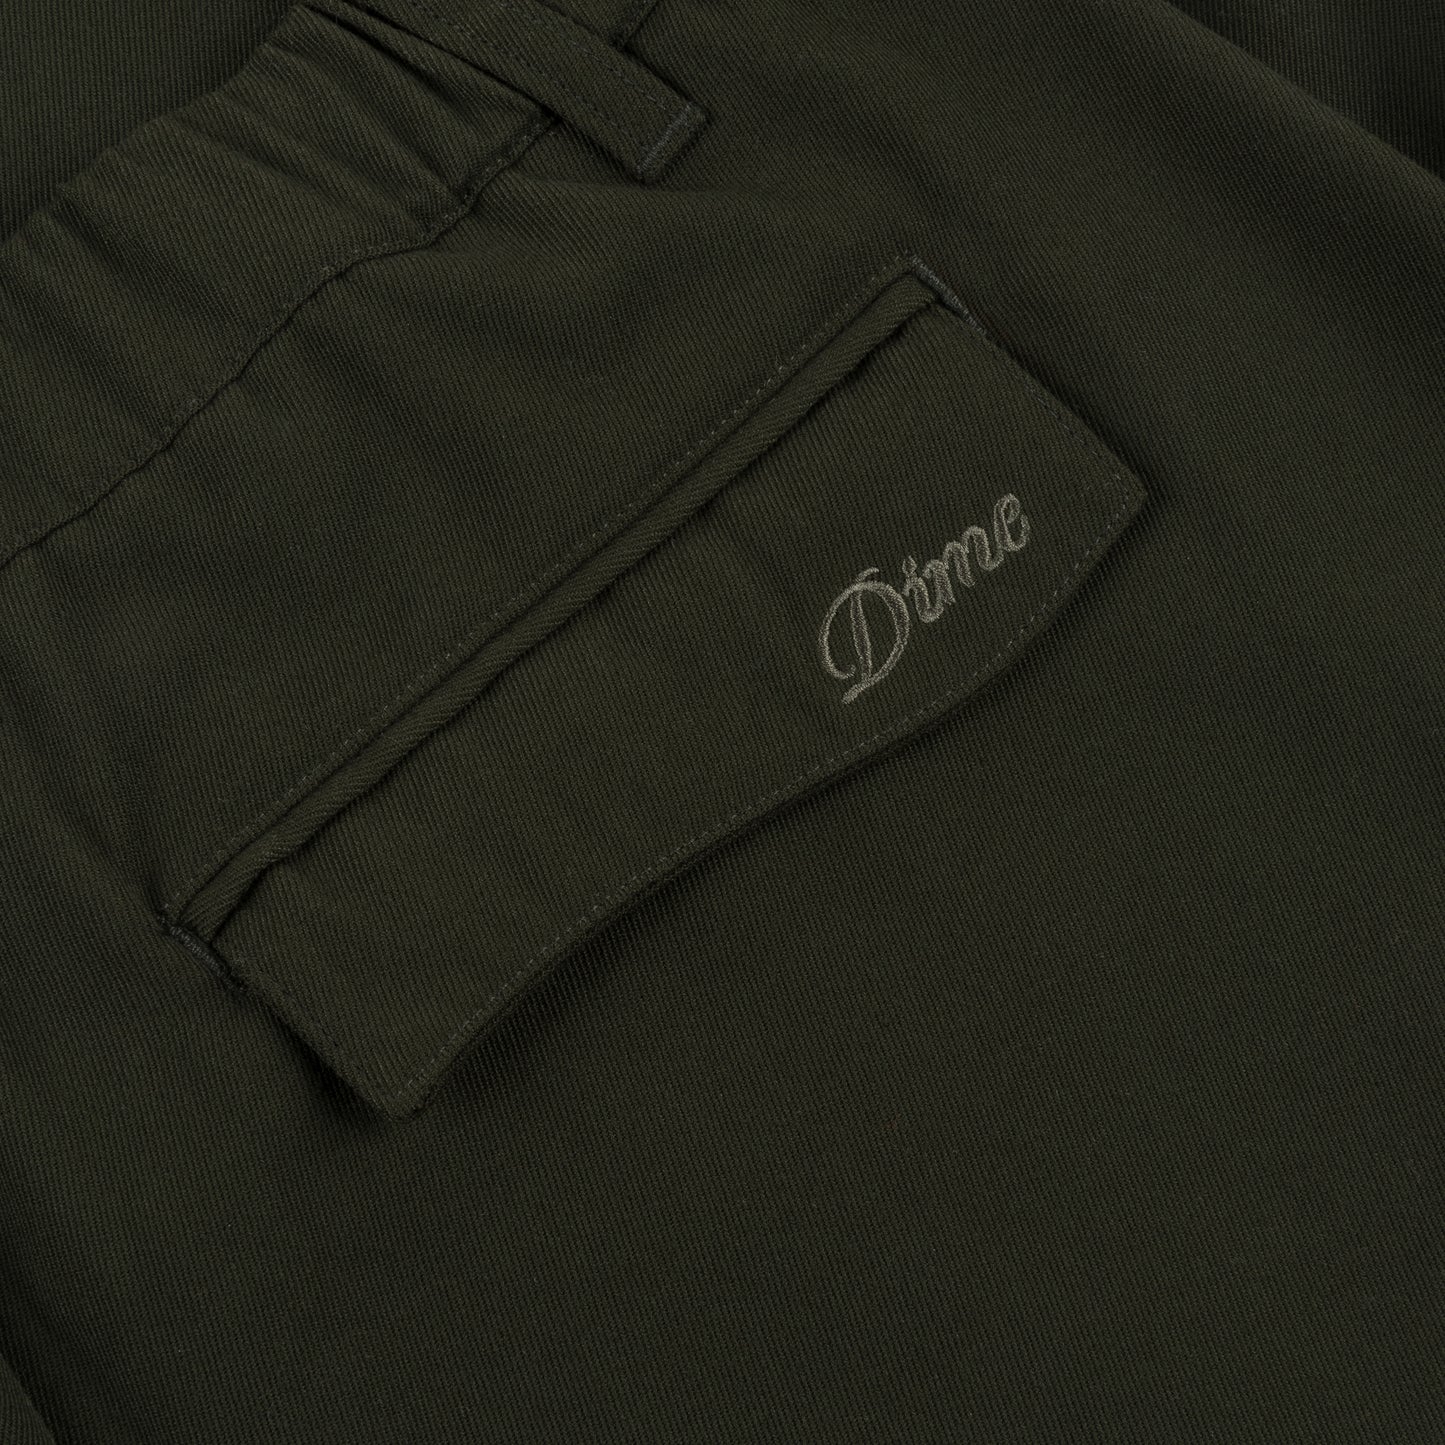 Dime PLEATED TWILL PANTS "Forest Green"